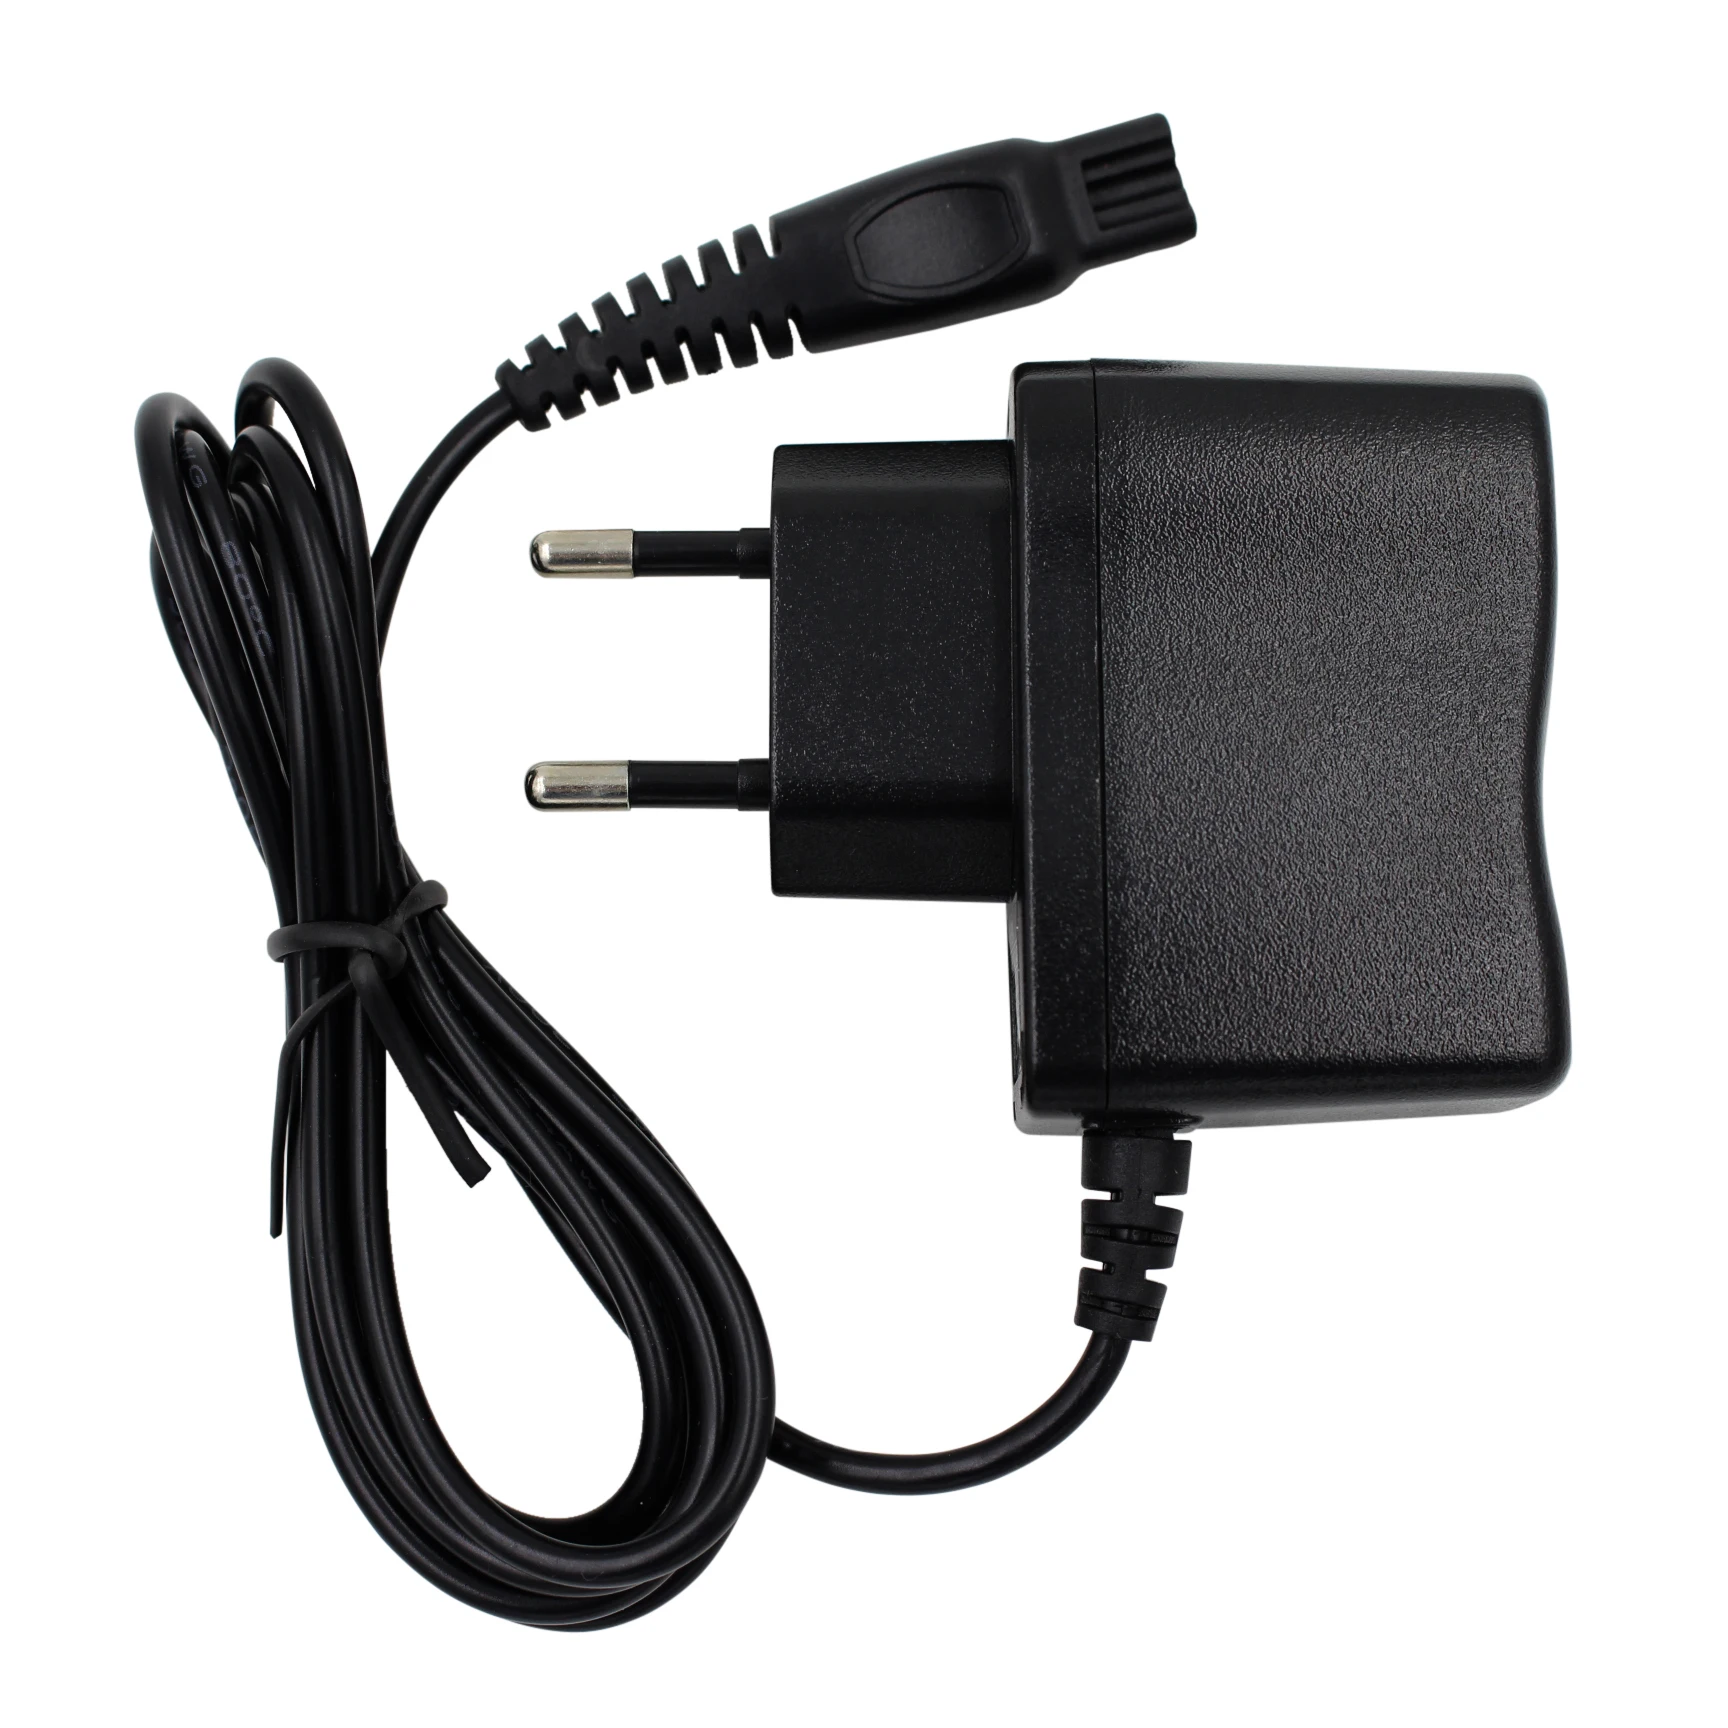 Ac/dc Power Adapter Charger For Philips Series 9000 Shaver Razor S9211/12 Ac/dc Adapters AliExpress